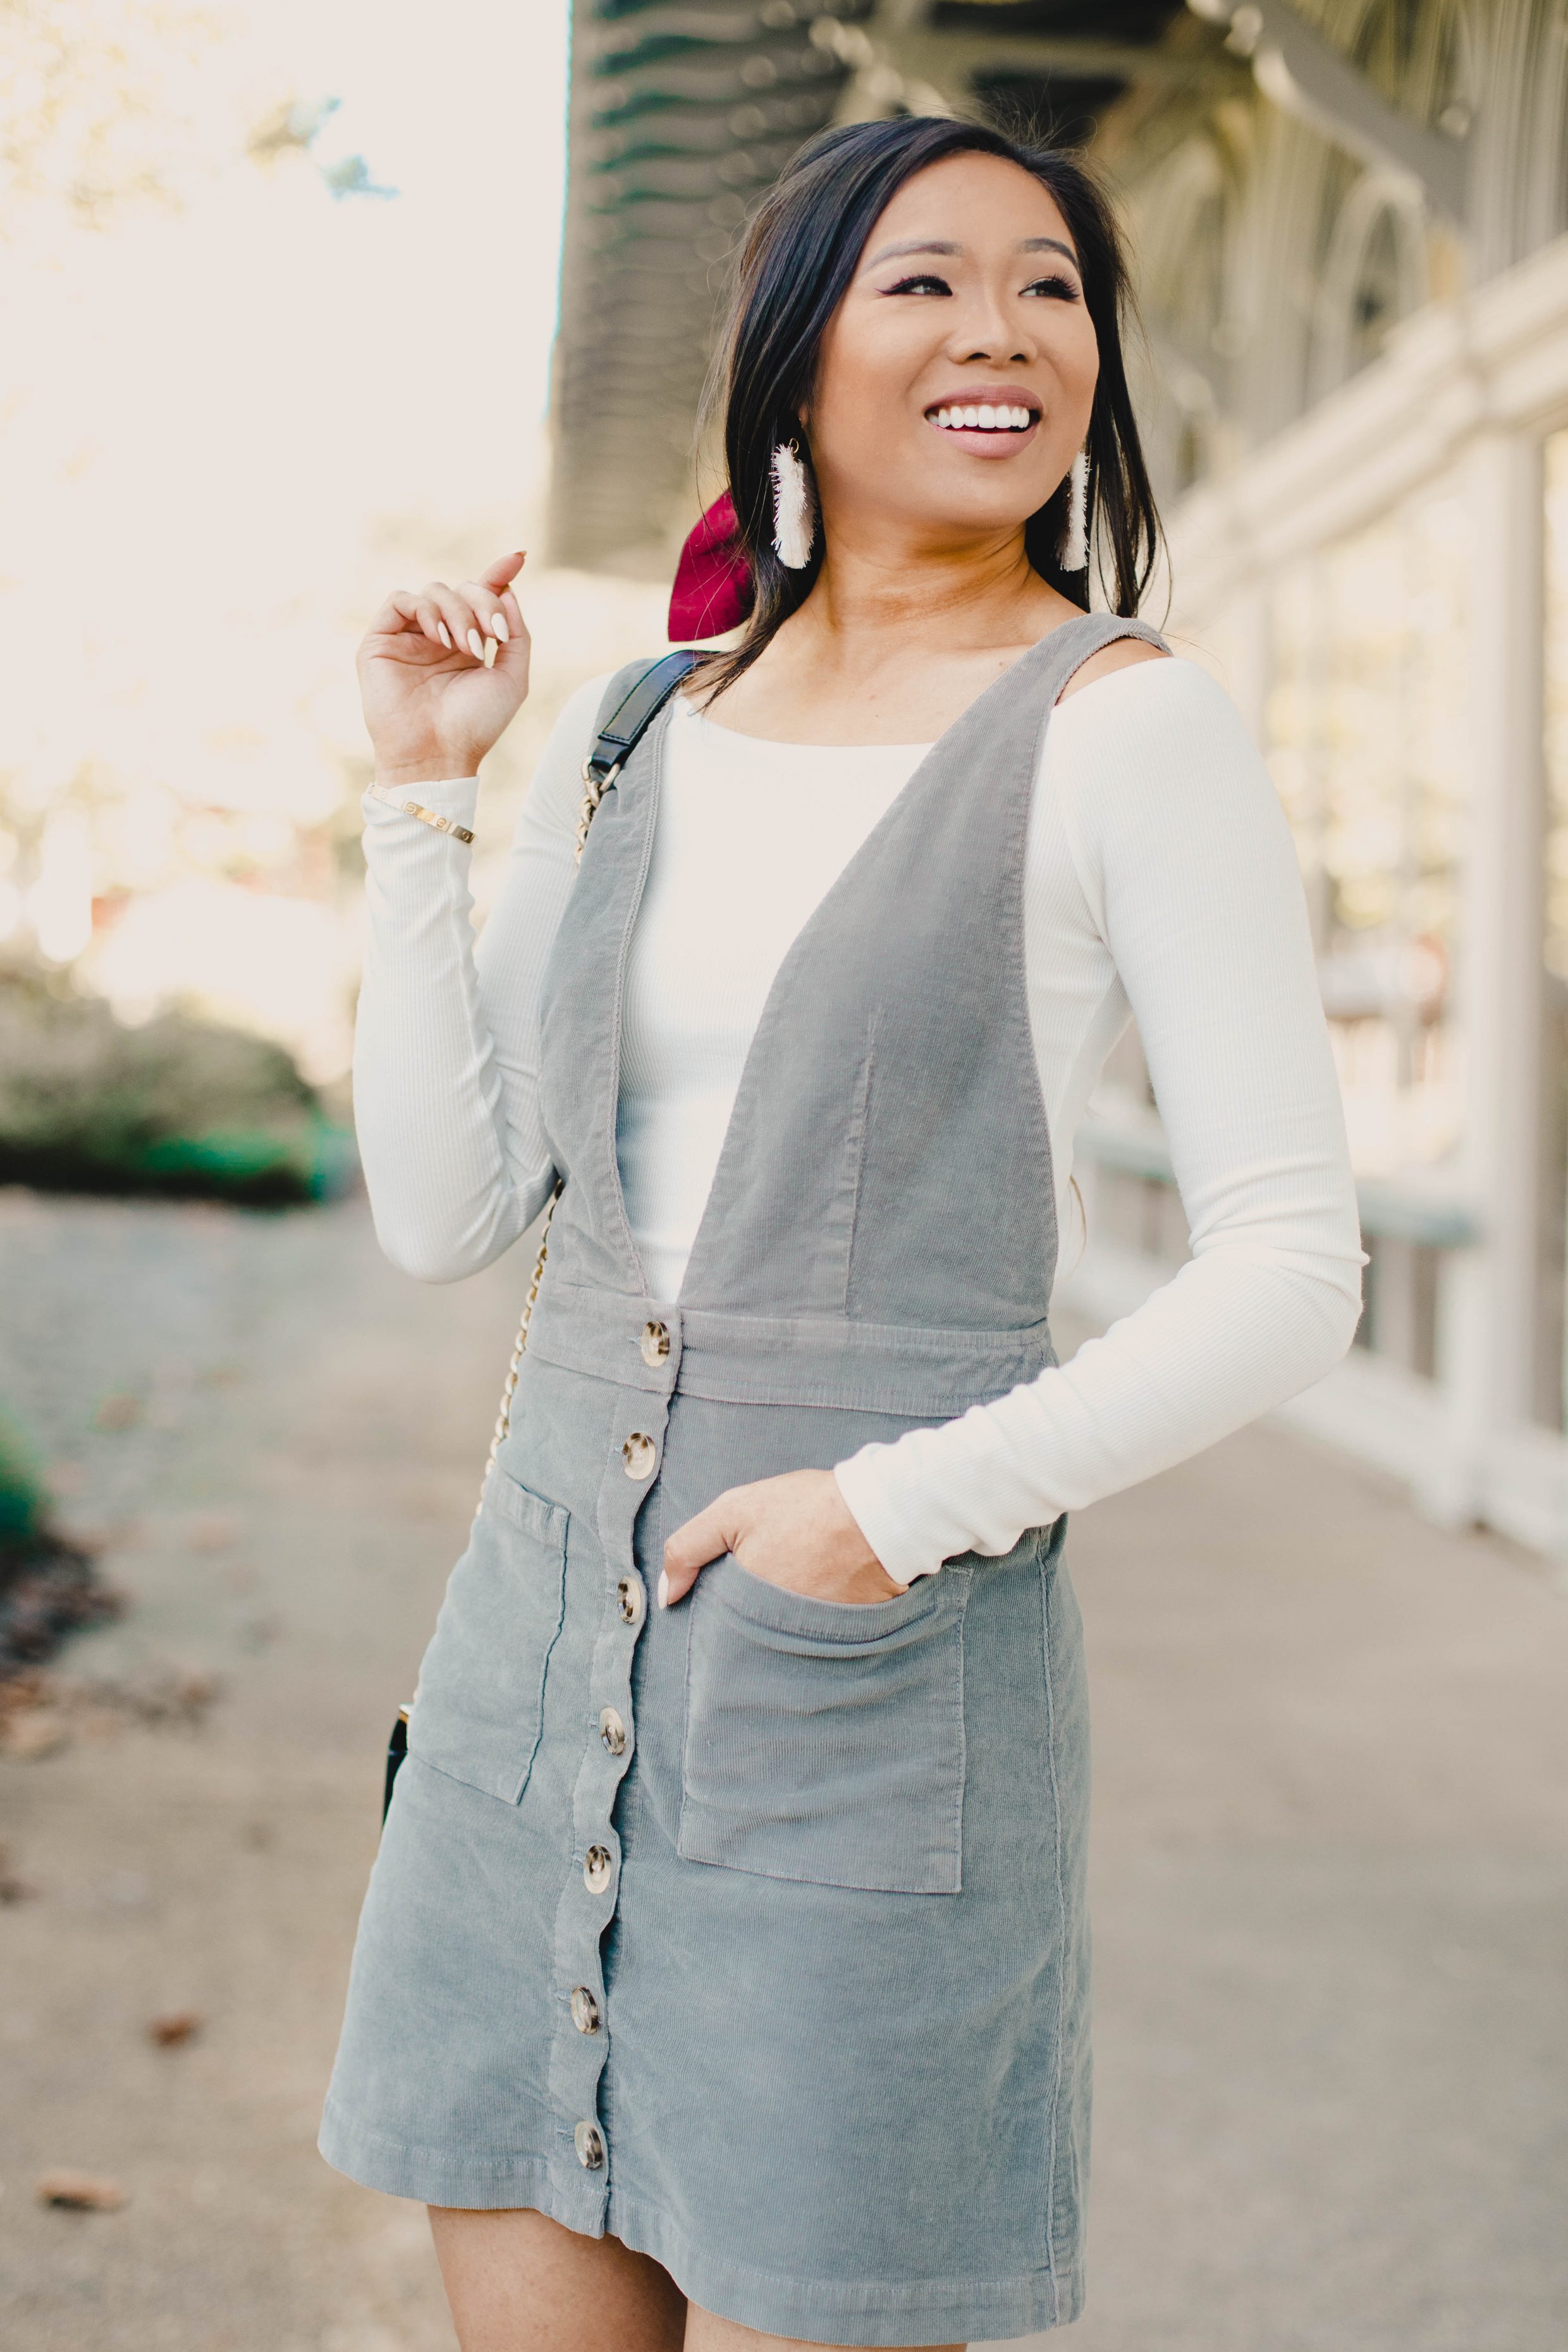 Blogger Hoang-Kim wears a corduroy overall dress with a satin scrunchie for fall